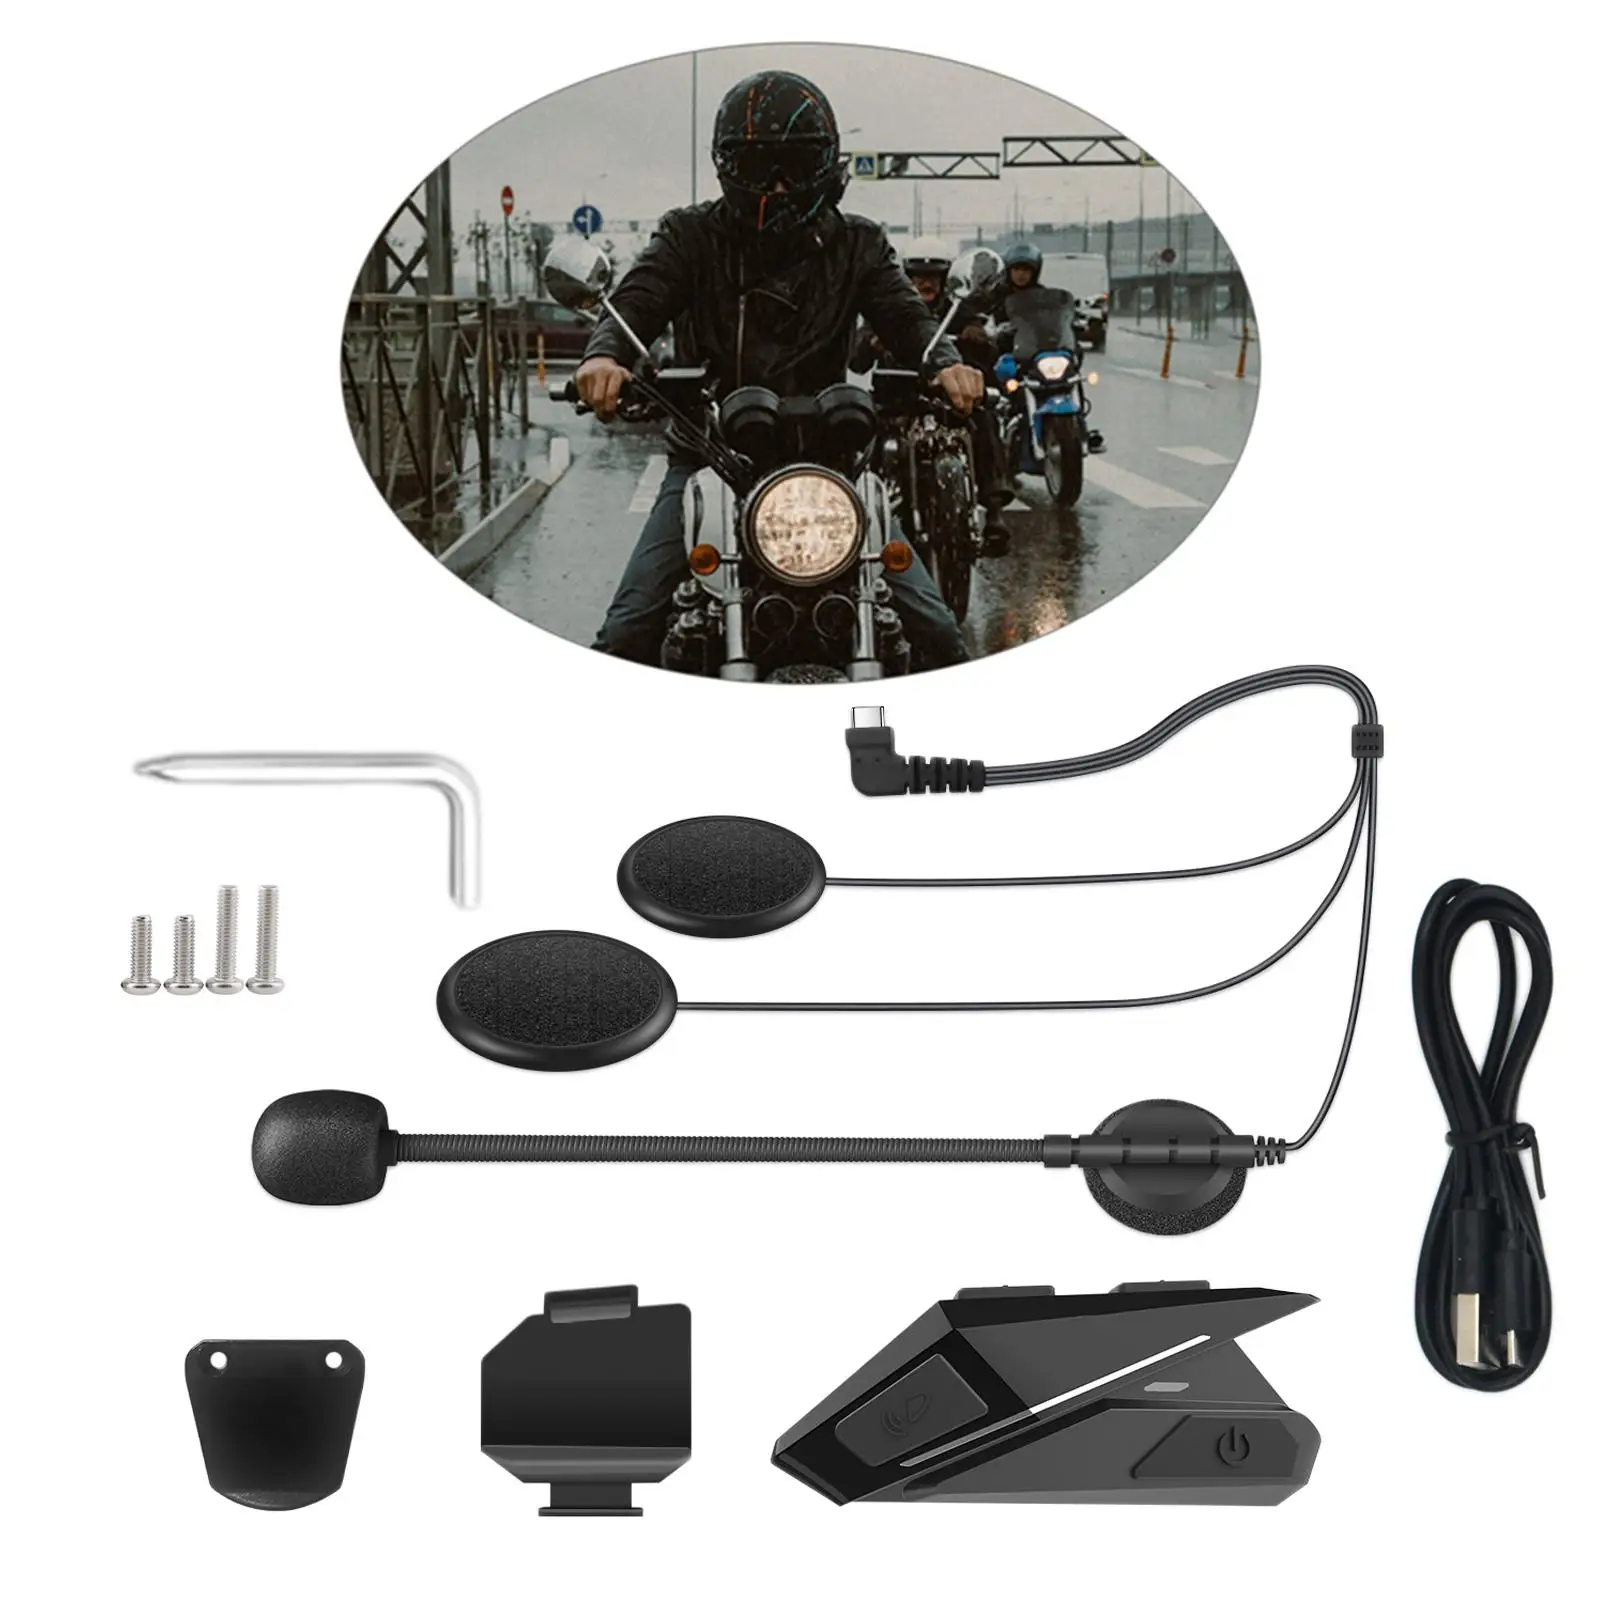 Handsfree Motorcycle  5.0 Headset   Noise Reduction Headphone   Outdoor Sports Driving